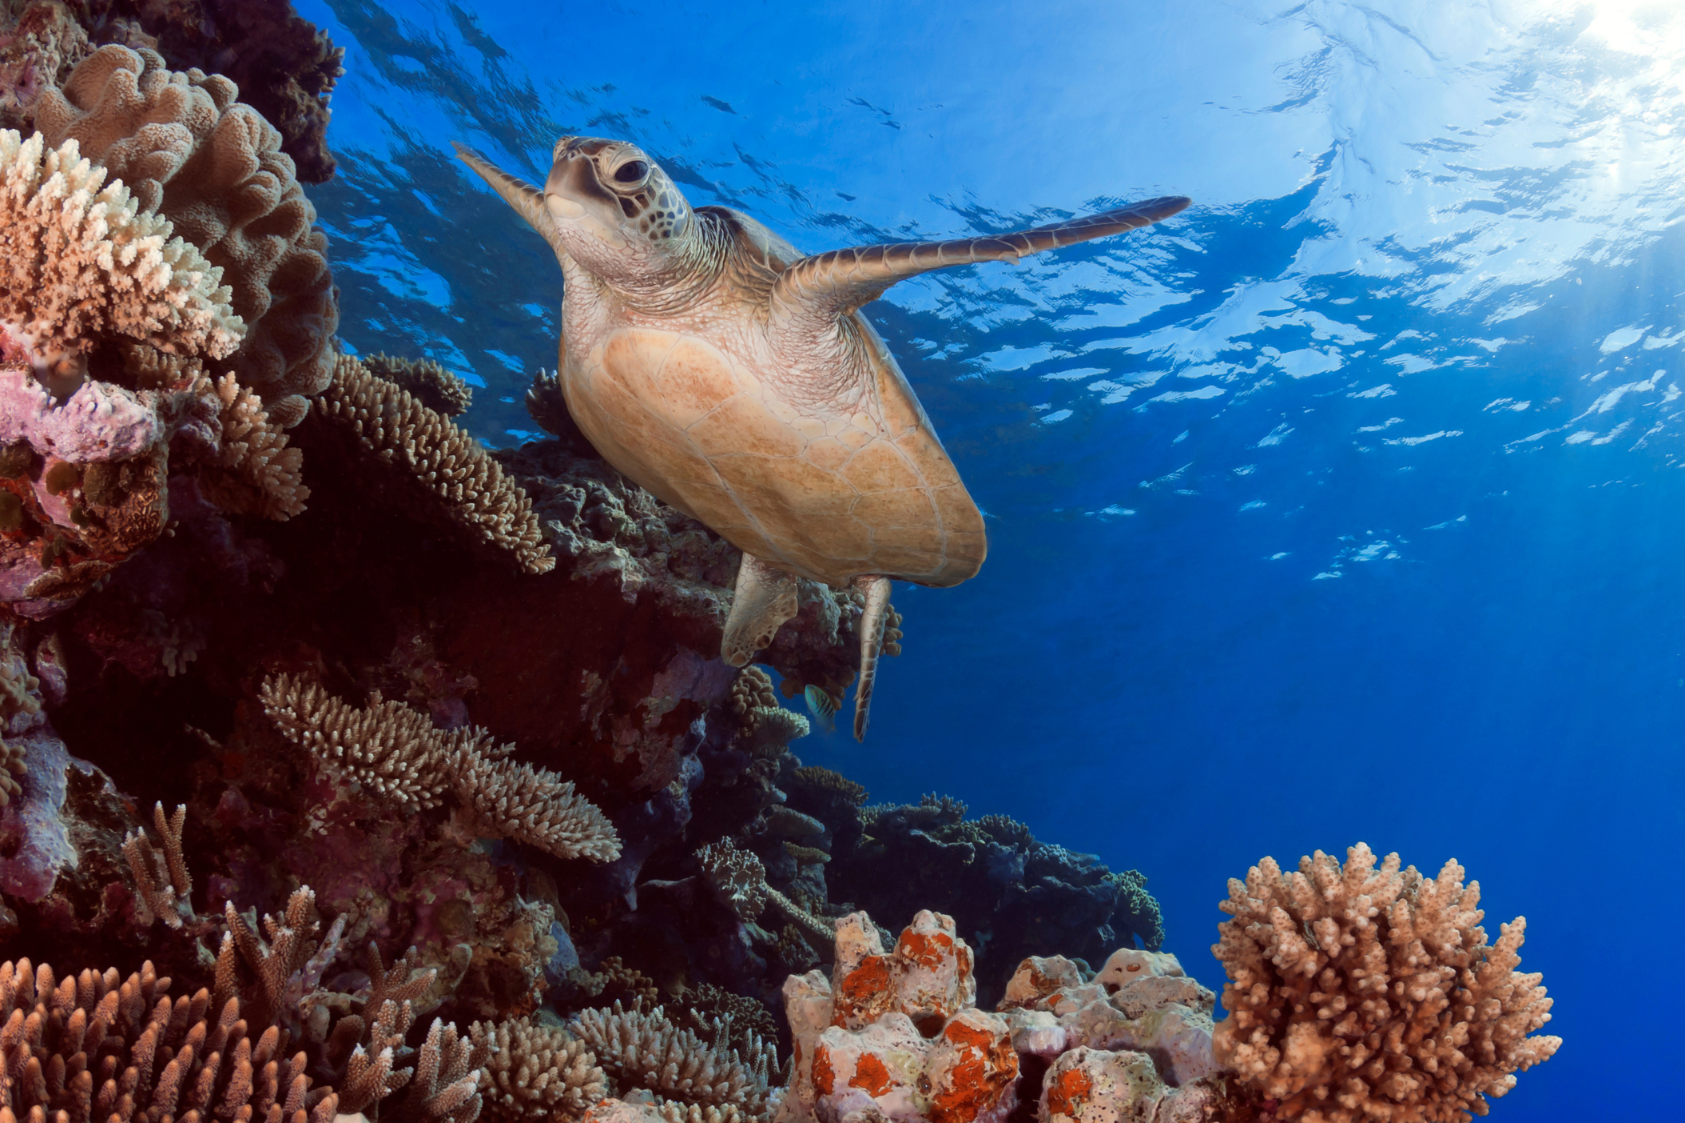 Image of a sea turtle swimming along the reef